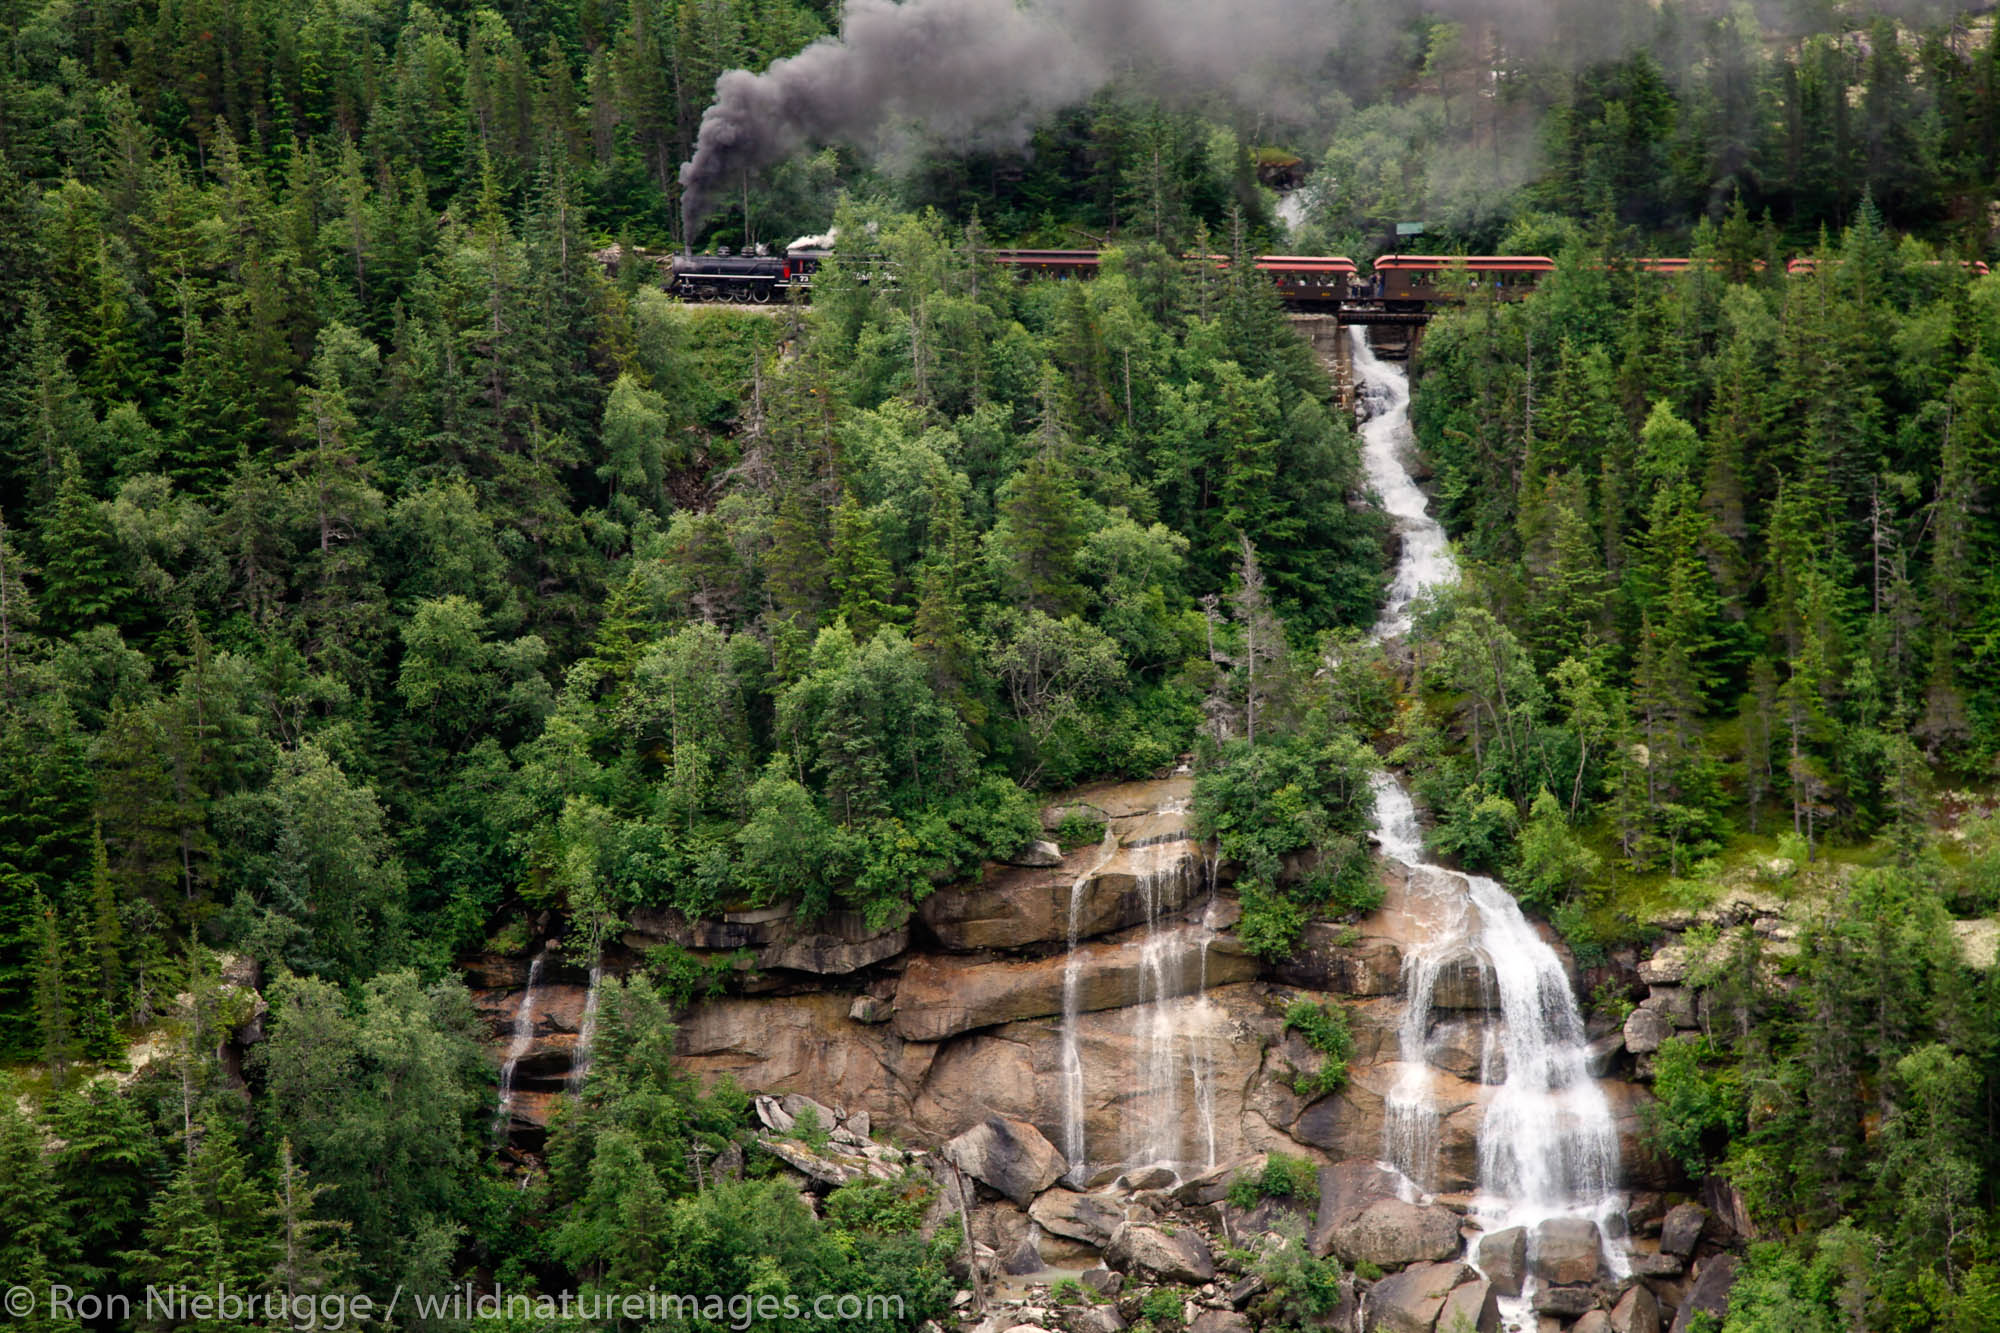 The historic steam engine number 73 and the White Pass and Yukon Route railroad from Skagway, Alaska.